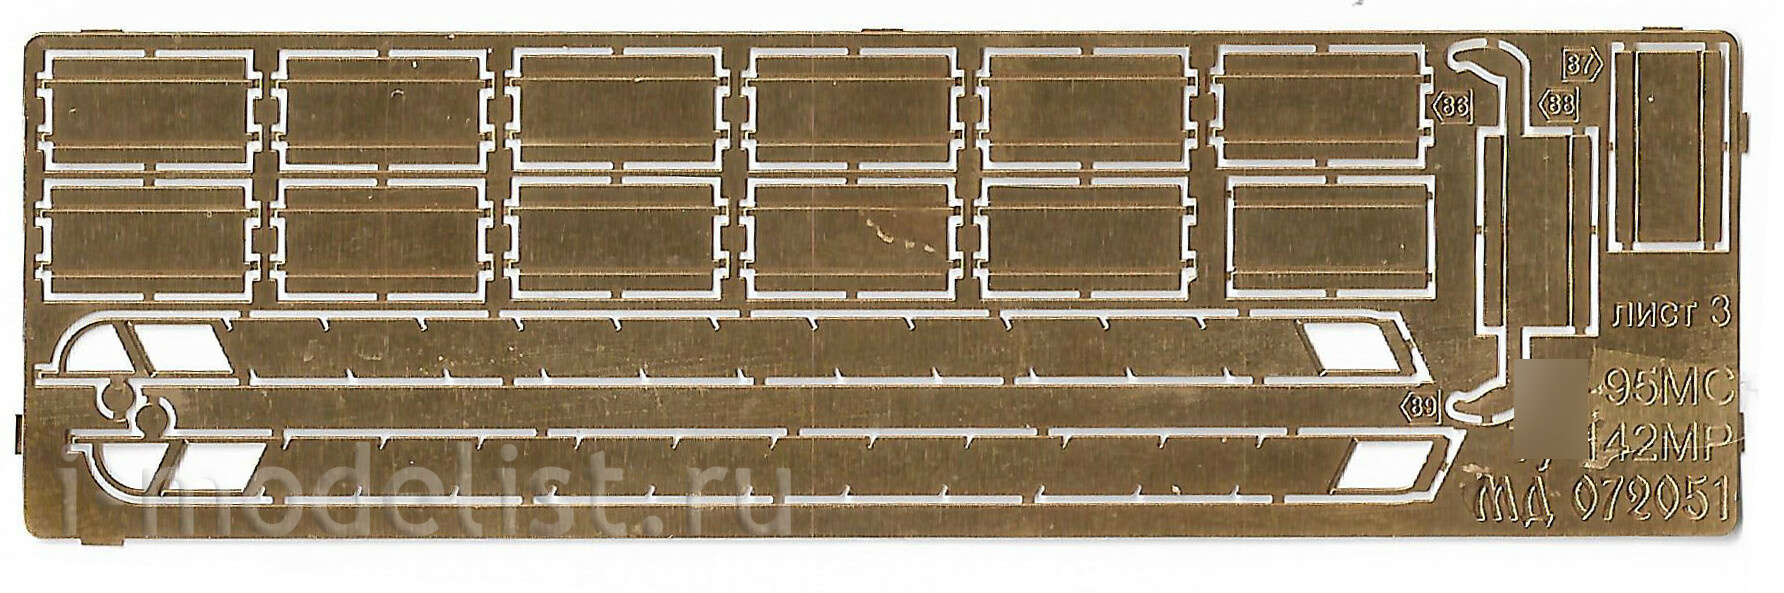 072051 Micro Design 1/72 Exterior Photo Etching Kit for Tupolev-95MS/Tupolev-142MR (Trumpeter)	